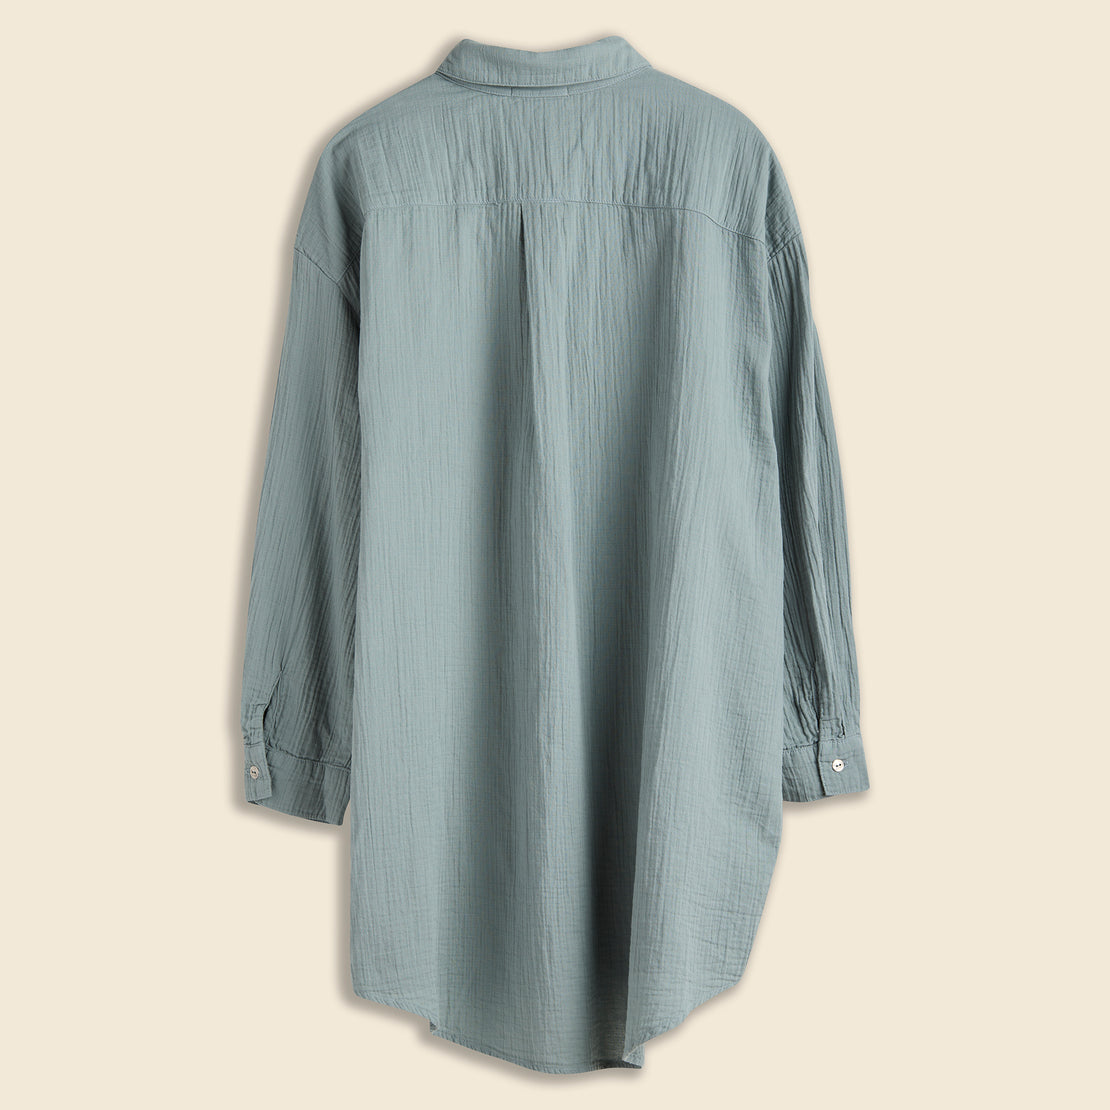 Oversized Overlay Shirt - Tradewinds - Atelier Delphine - STAG Provisions - W - Tops - L/S Woven